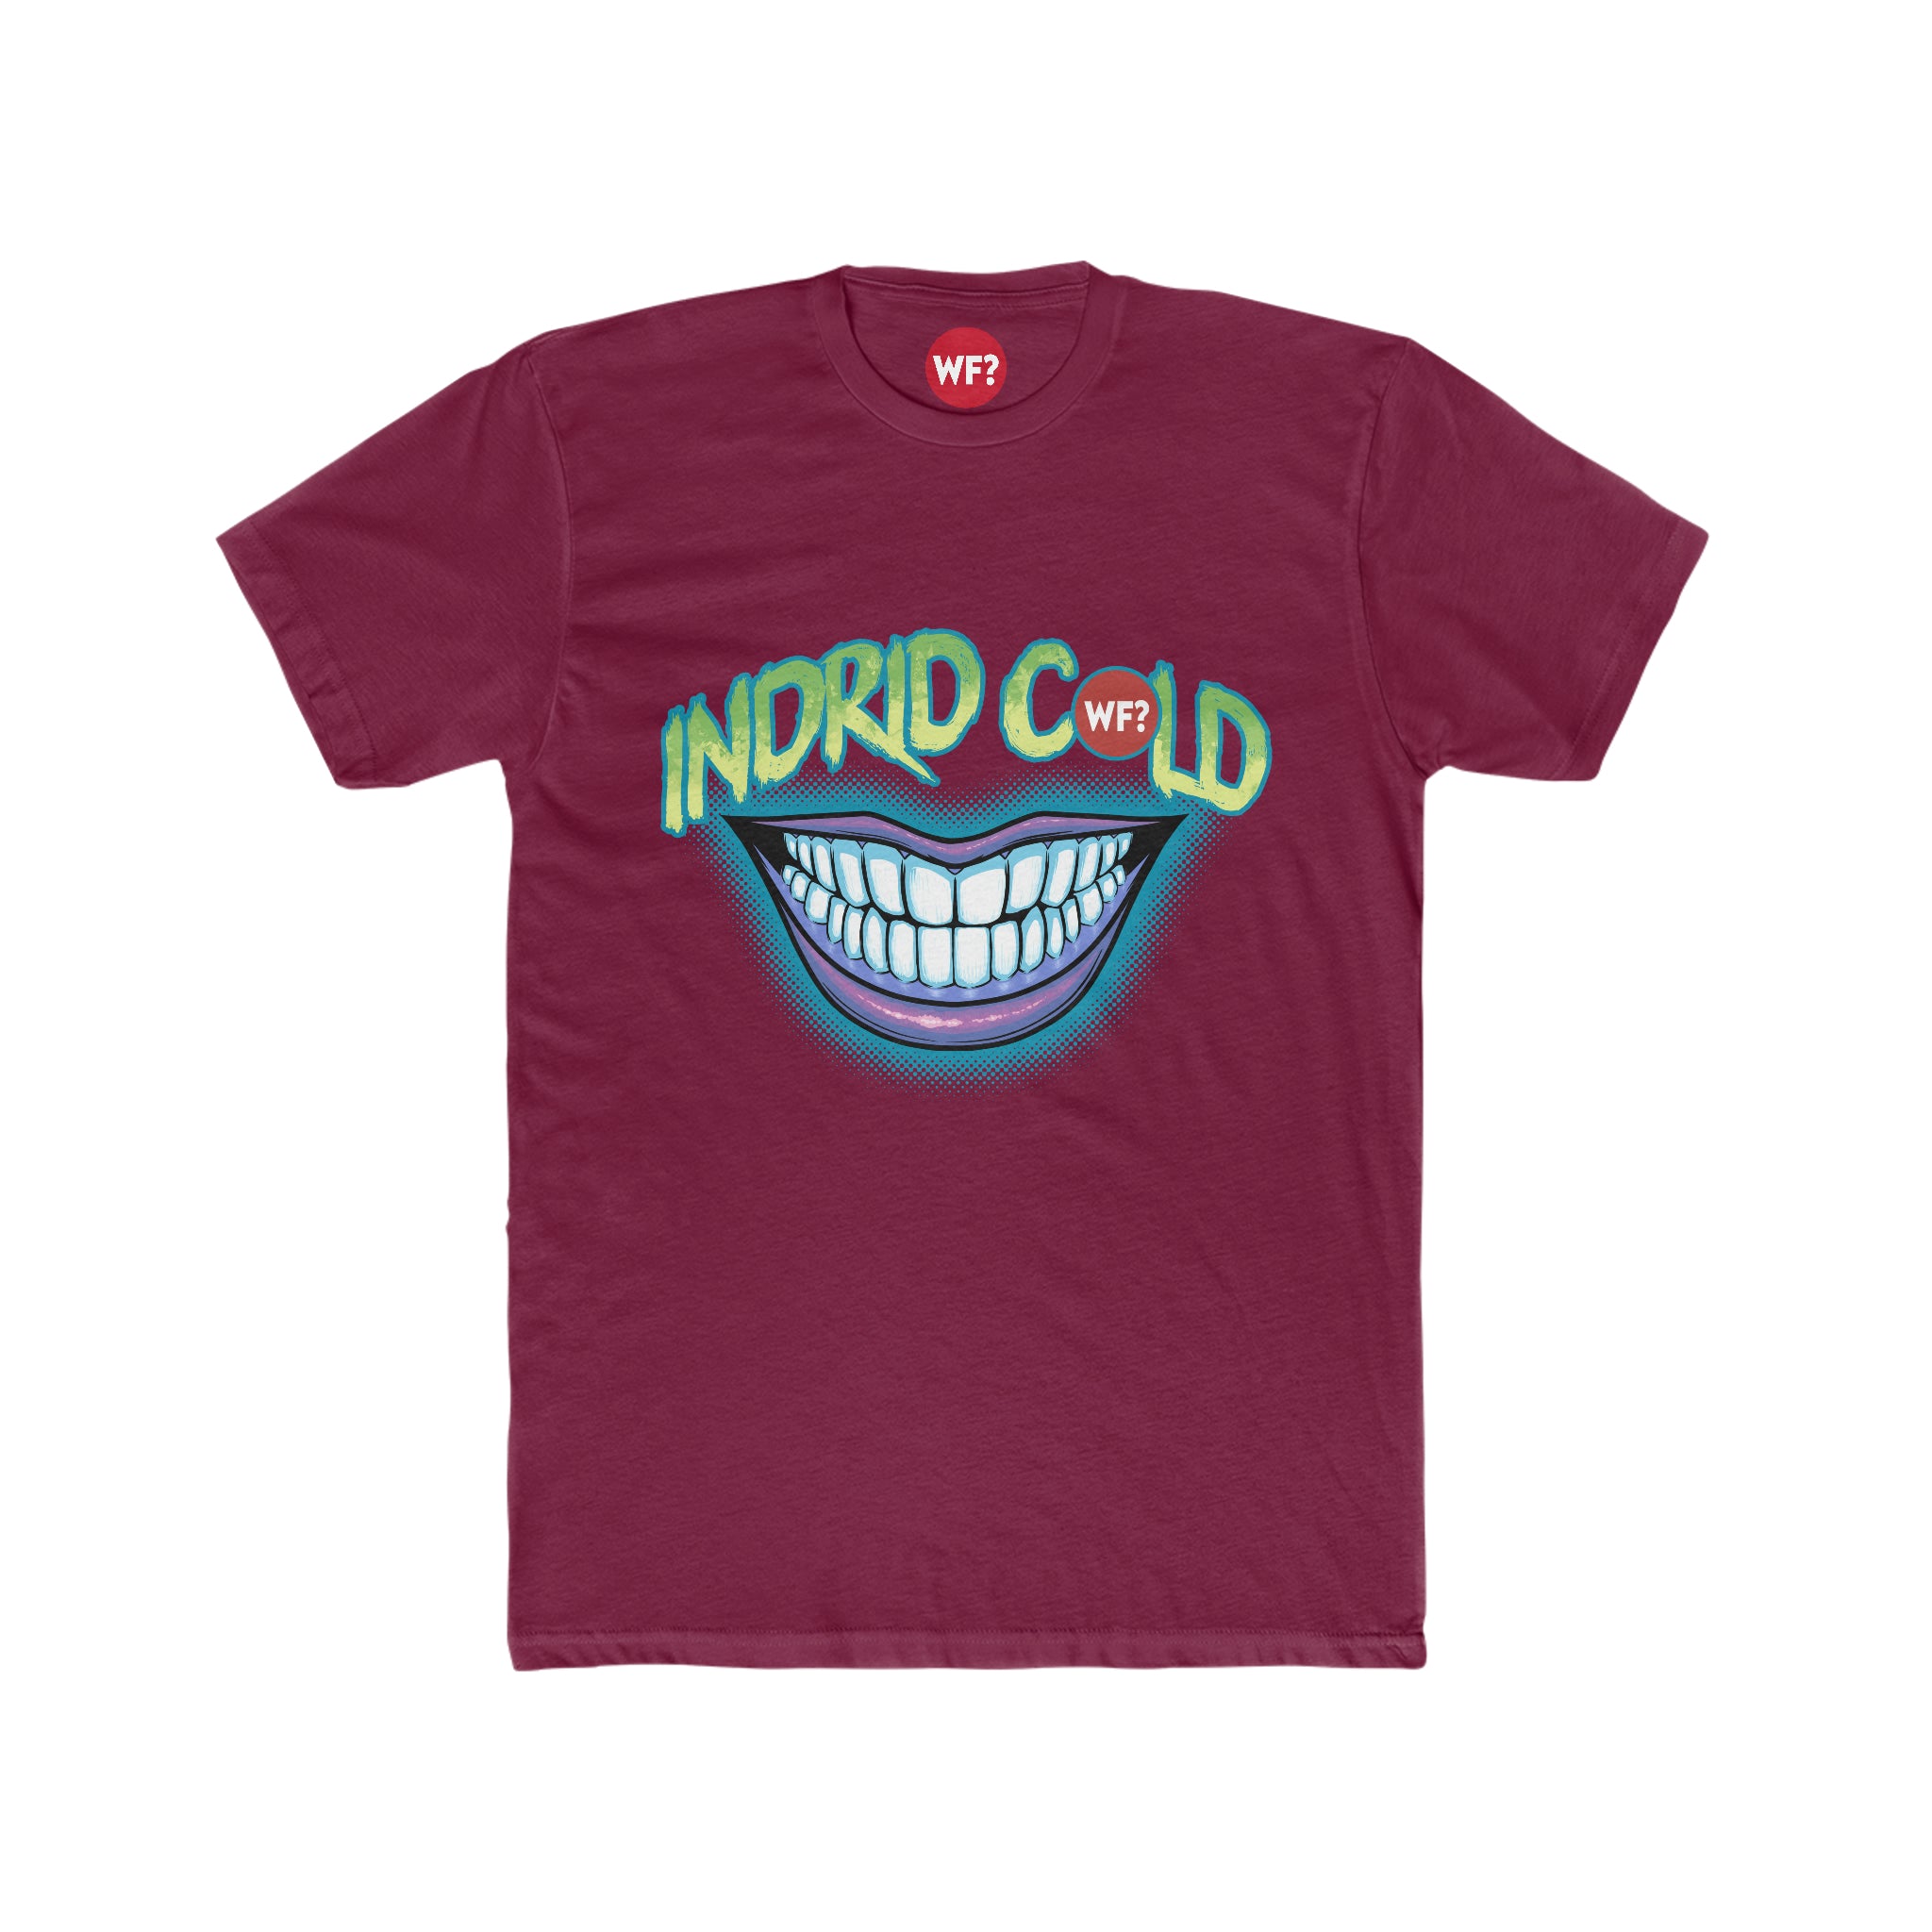 Buy solid-cardinal-red Indrid Cold Limited T-Shirt